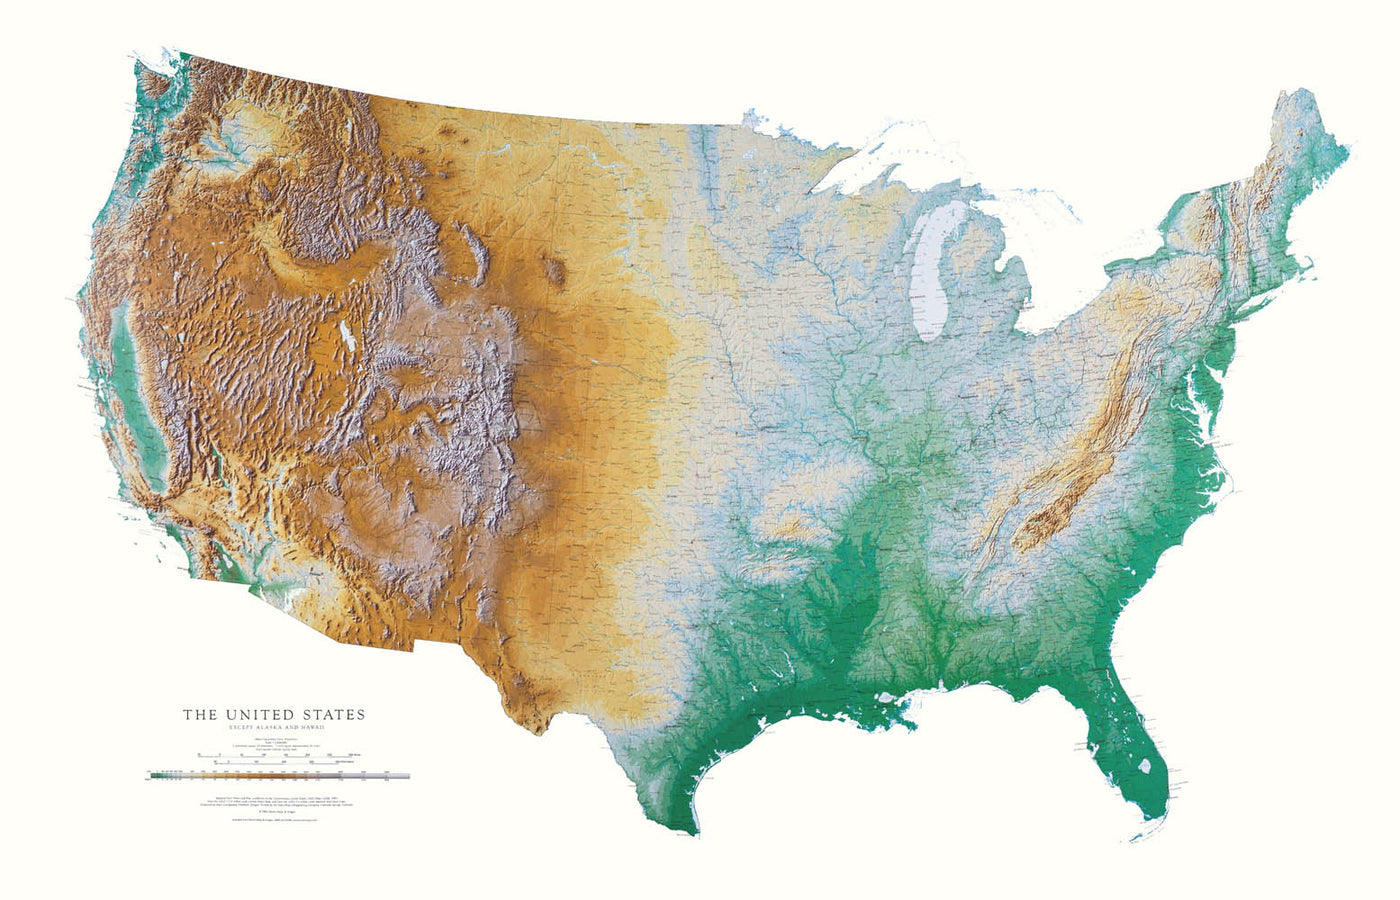 United States Topographic Wall Map by Raven Maps, 37" x 58"